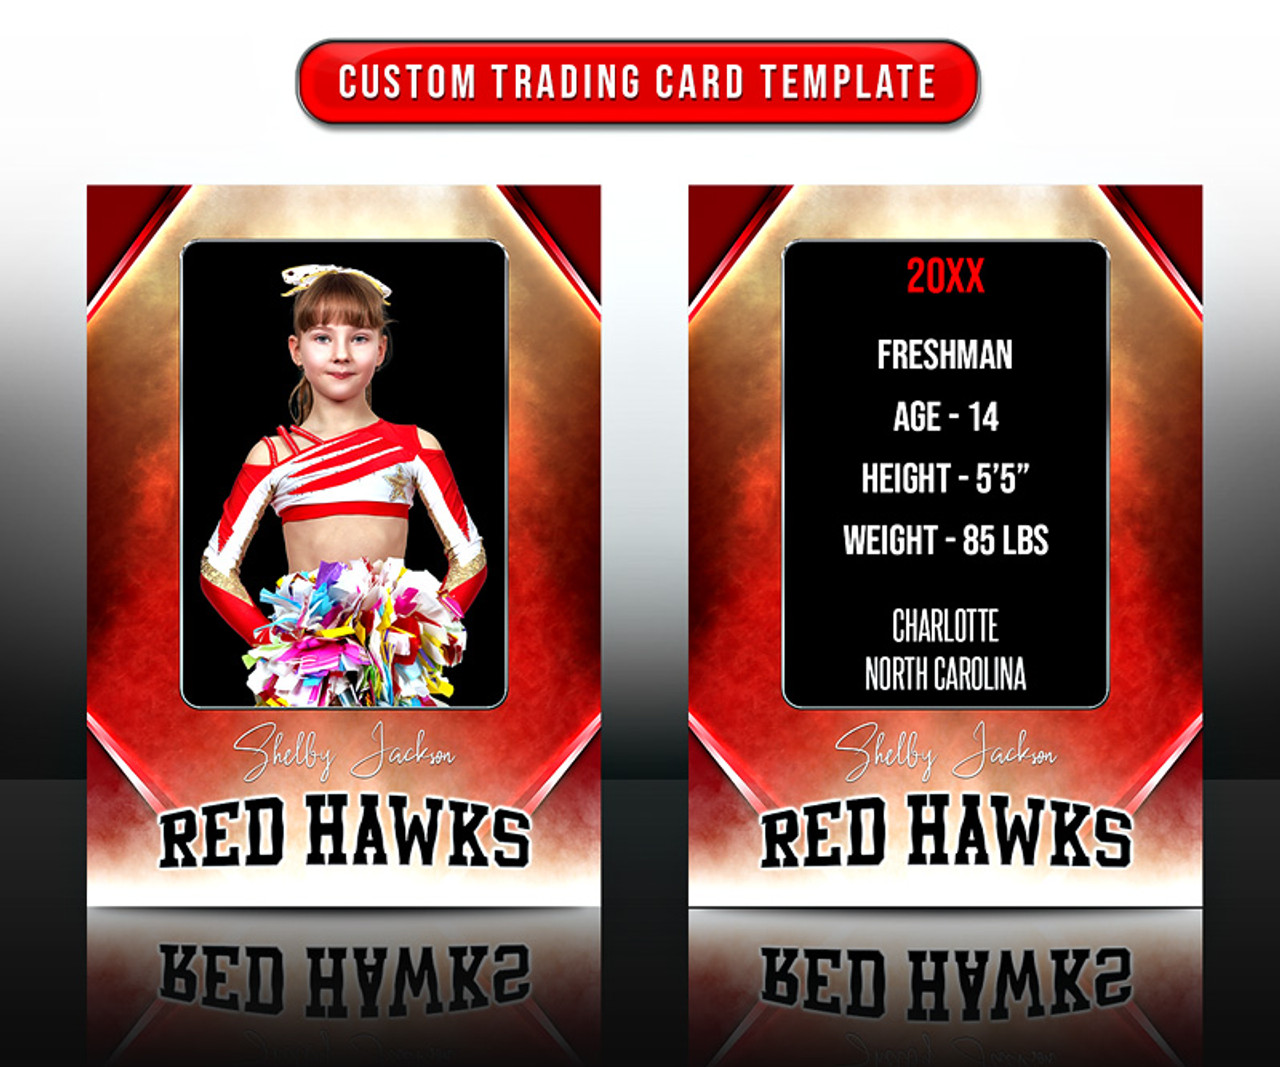 MULTI-SPORT TRADING CARDS AND 5X7 TEMPLATE - ESCAPE